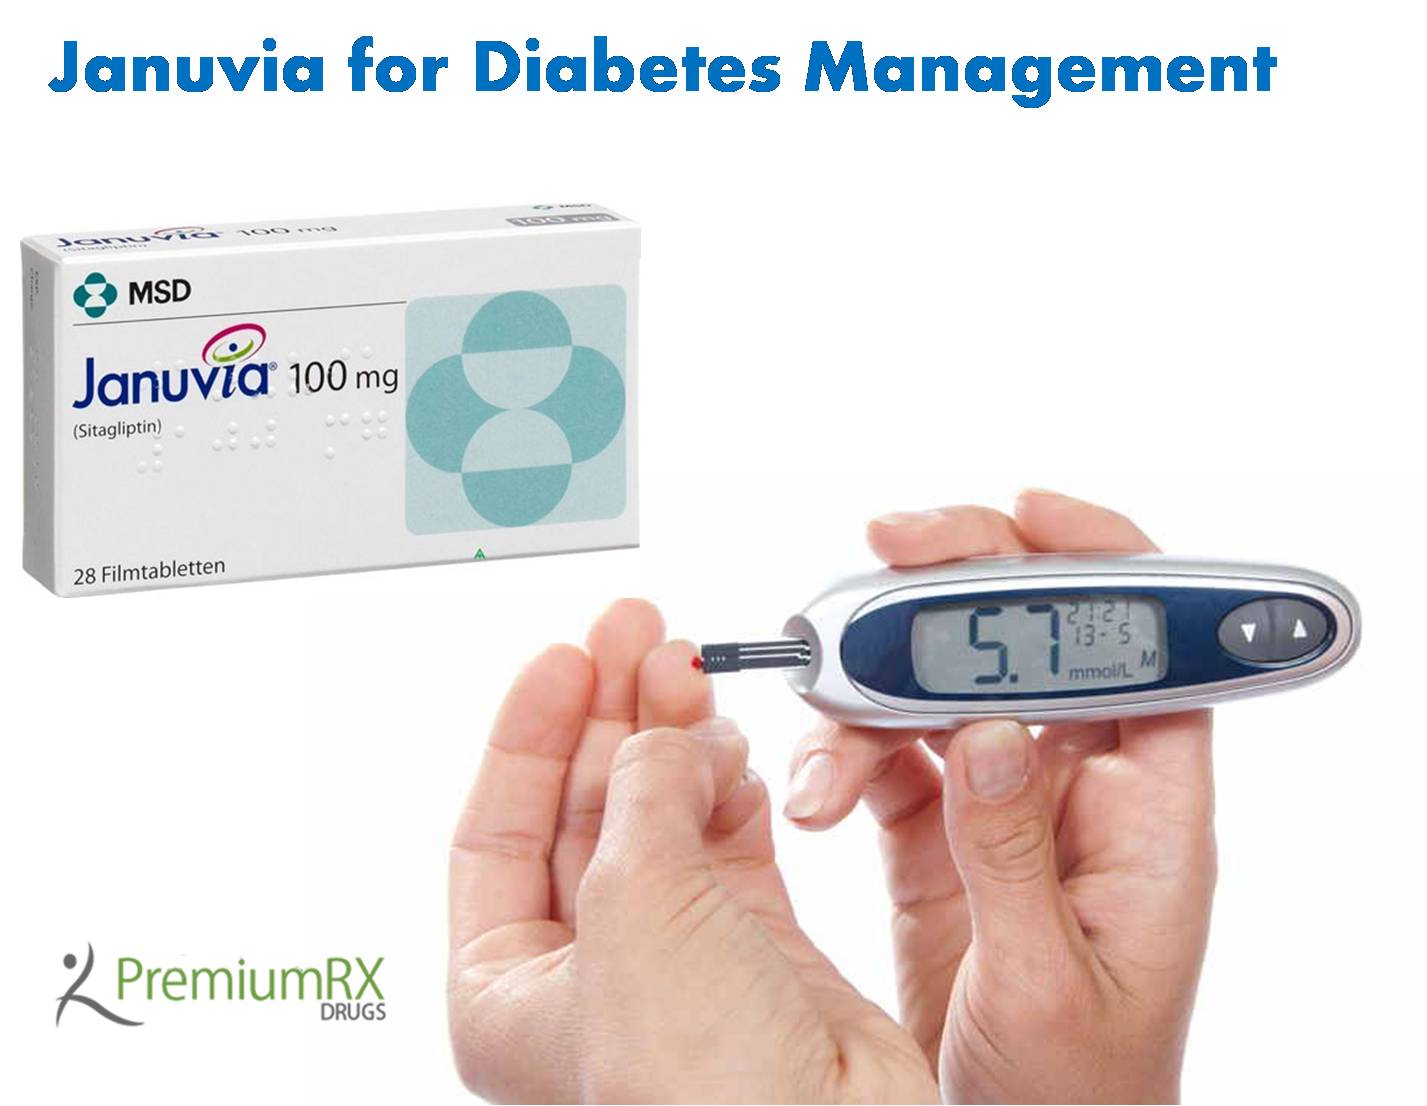 How does Januvia work in Diabetes Management